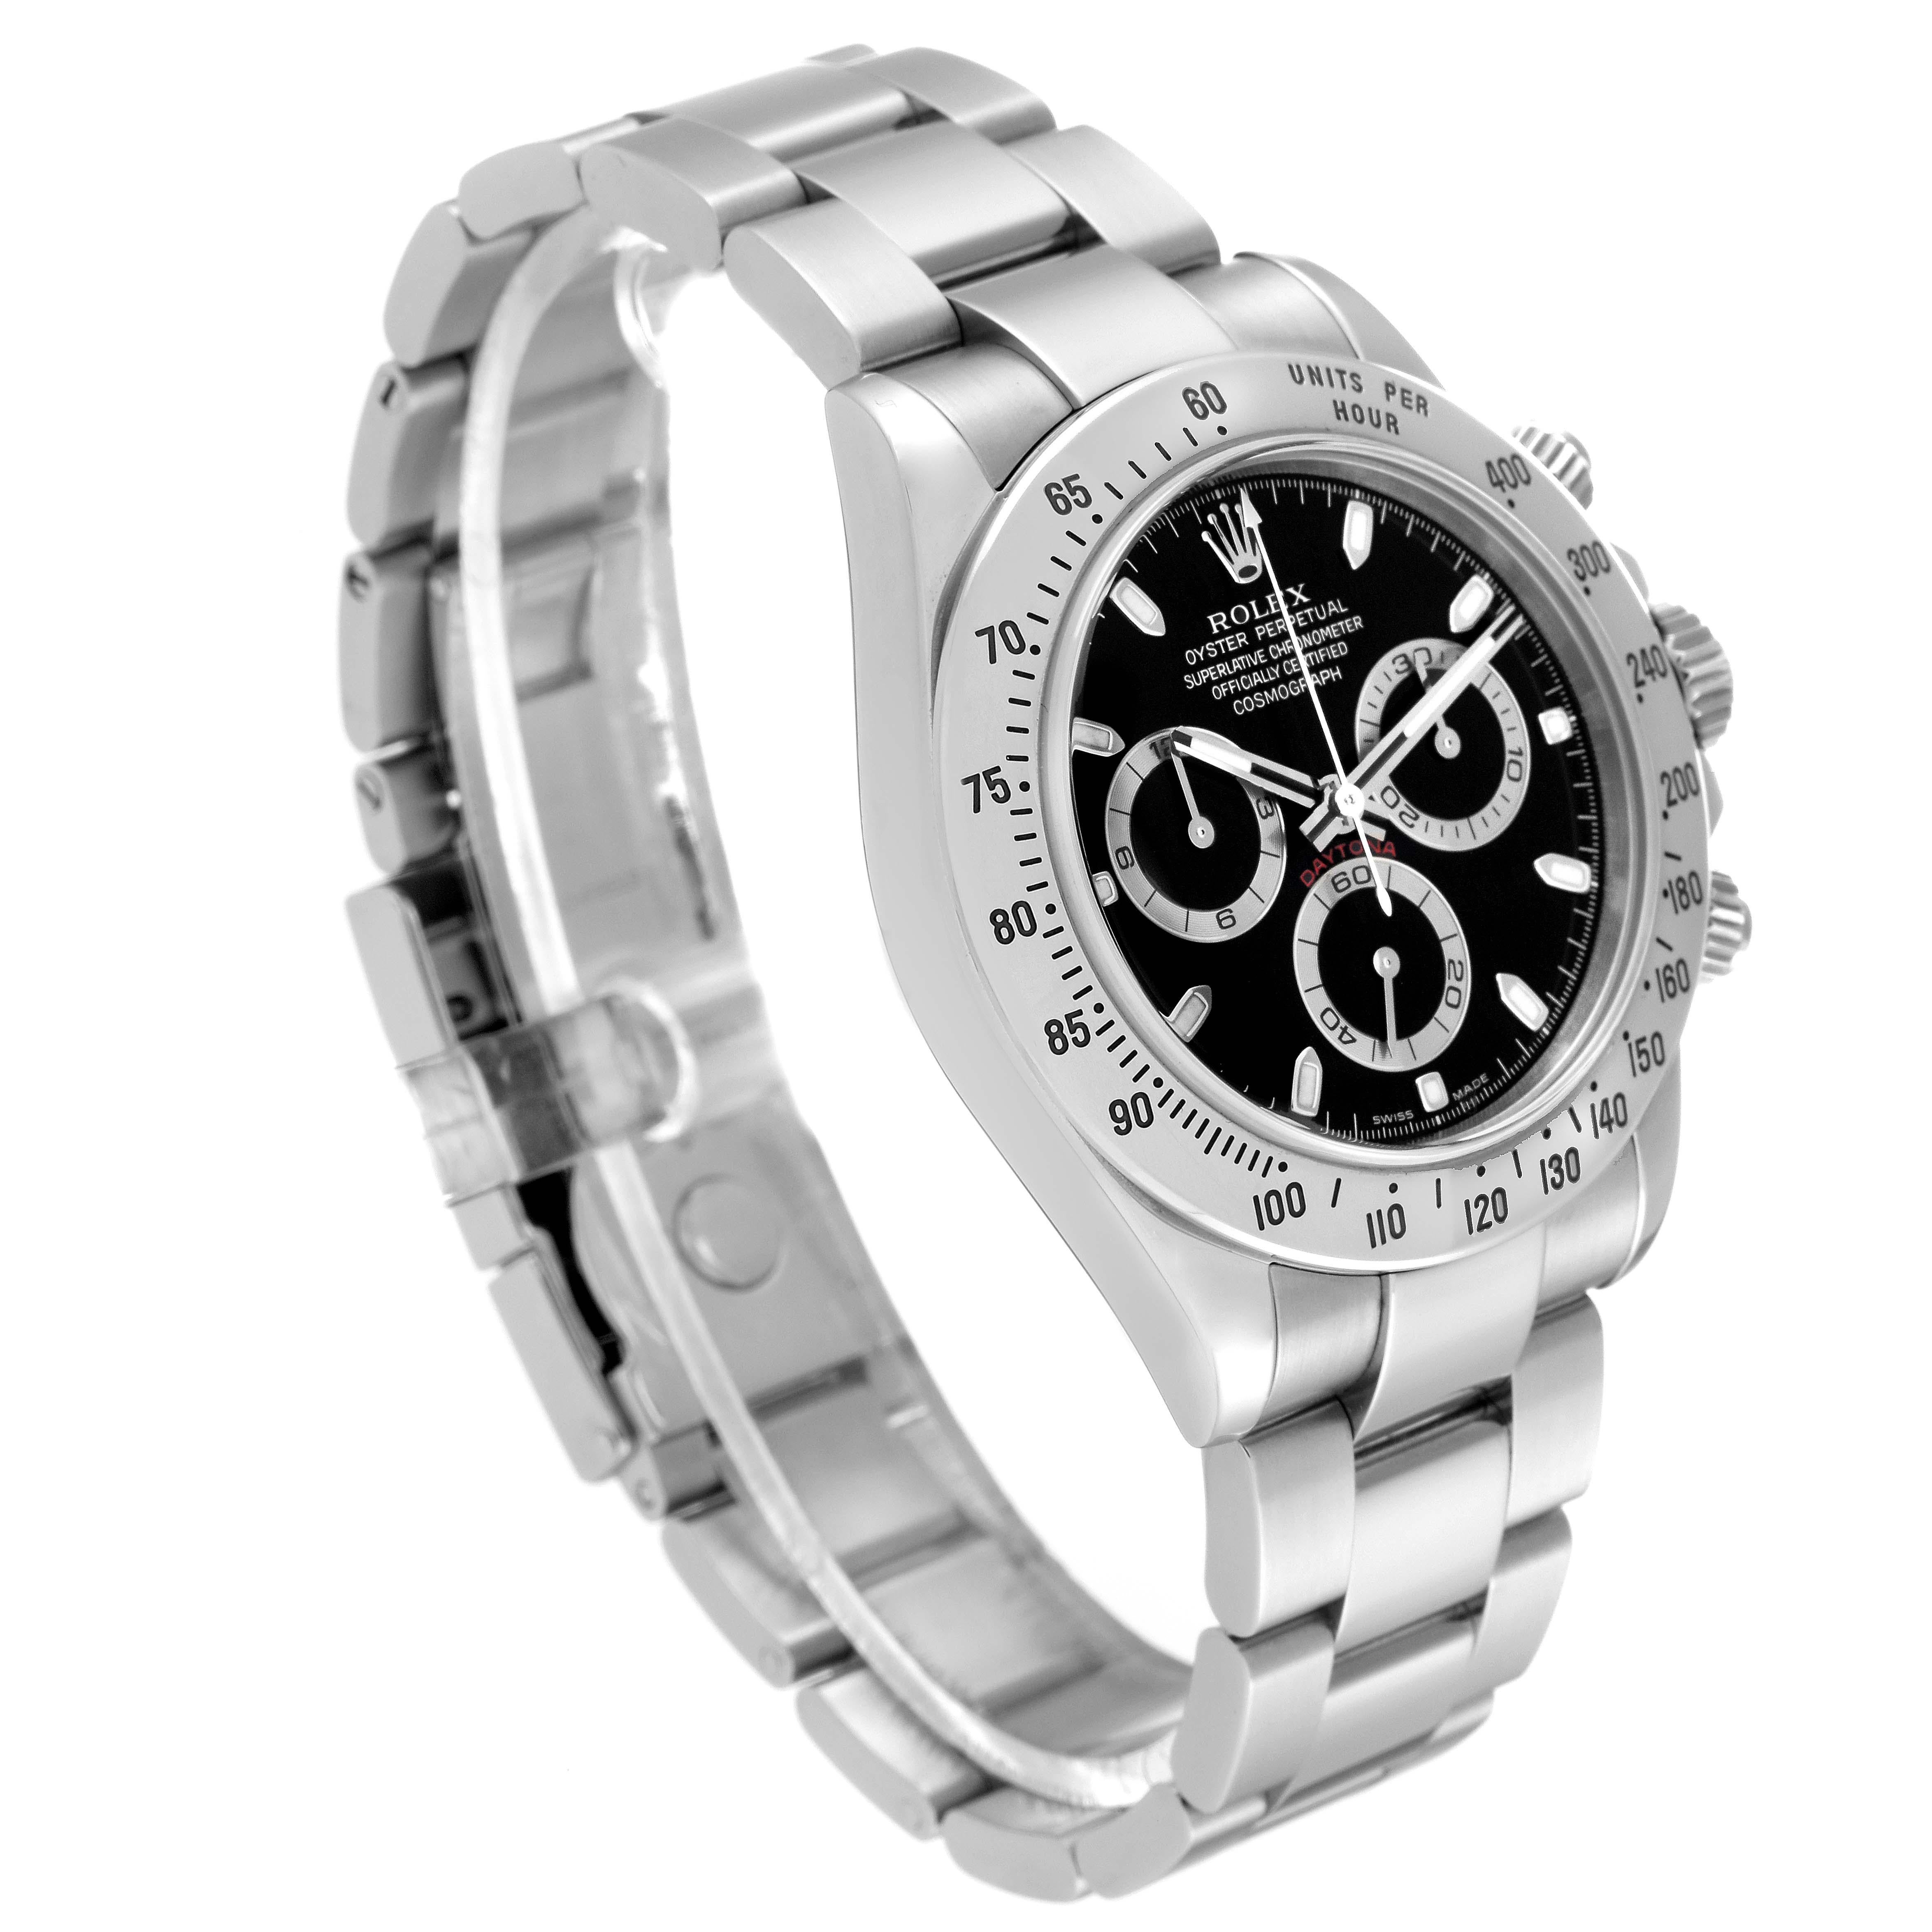 Rolex Daytona Chronograph Black Dial Steel Mens Watch 116520. Officially certified chronometer automatic self-winding movement. Stainless steel case 40 mm in diameter. Special screw-down push buttons. Polished stainless steel bezel with engraved